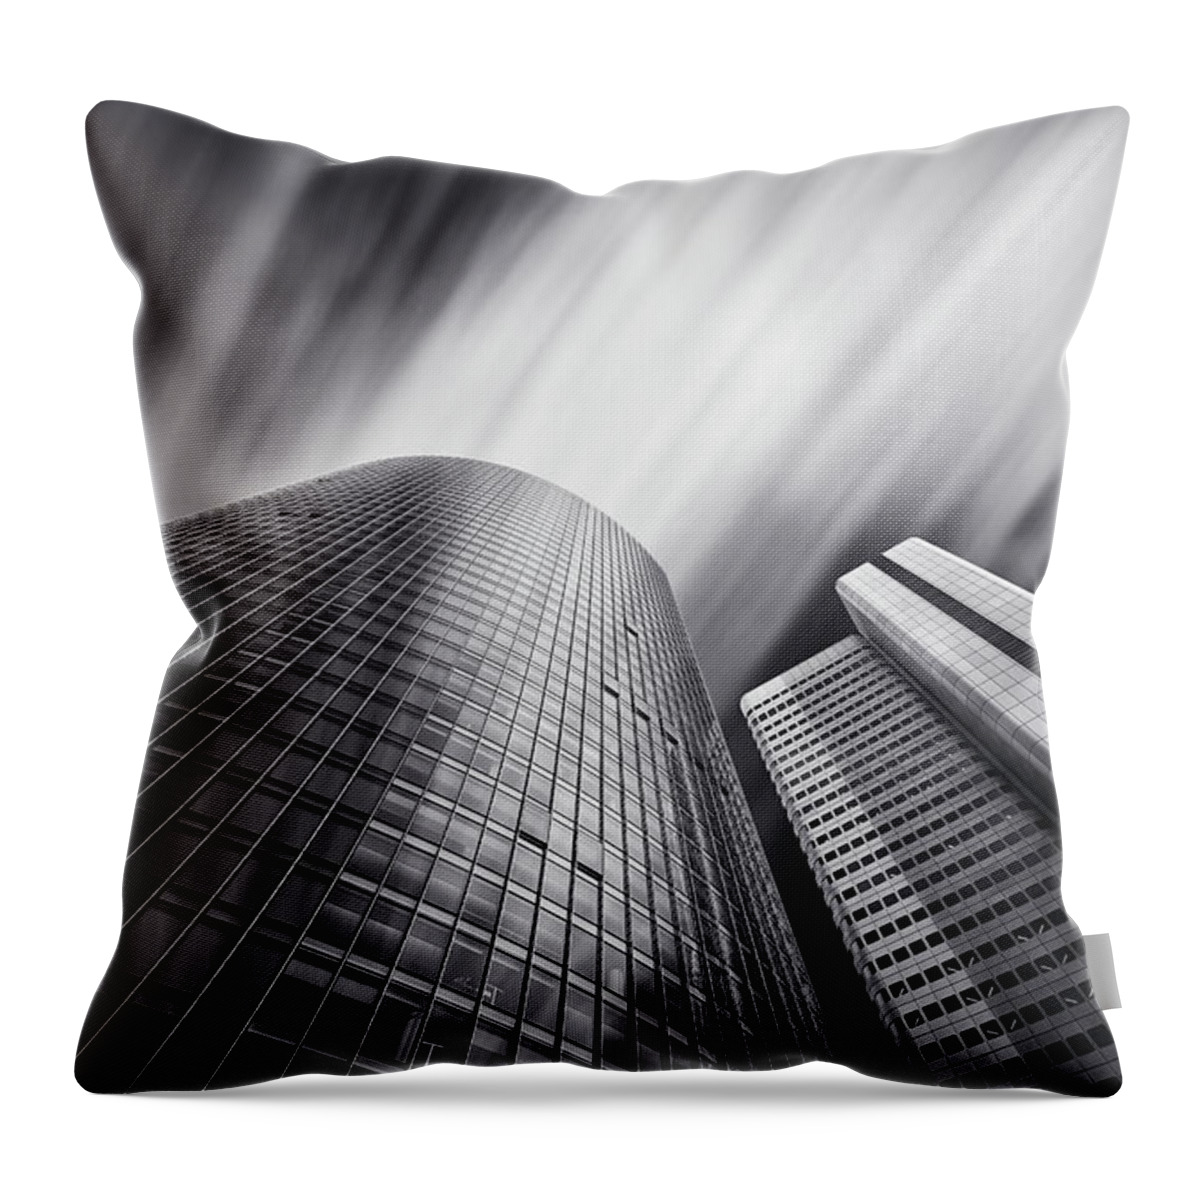 Directly Below Throw Pillow featuring the photograph Germany, Hesse, Frankfurt, View Of by Westend61